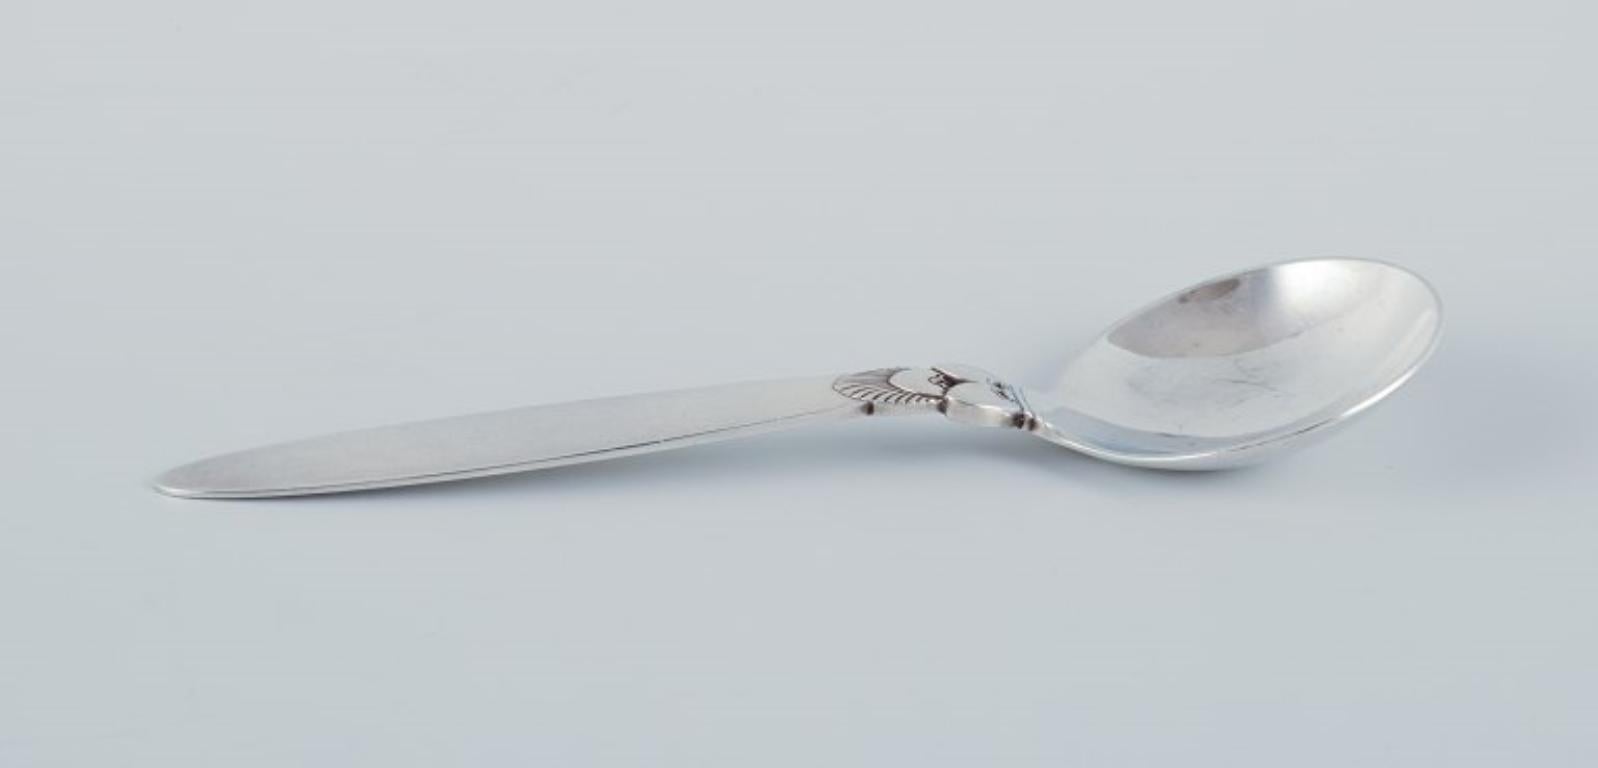 Georg Jensen, Cactus, a pair of sterling silver jam spoons.
Stamped with the hallmark from 1945-1951.
In excellent condition.
Dimensions: 13.6 cm.